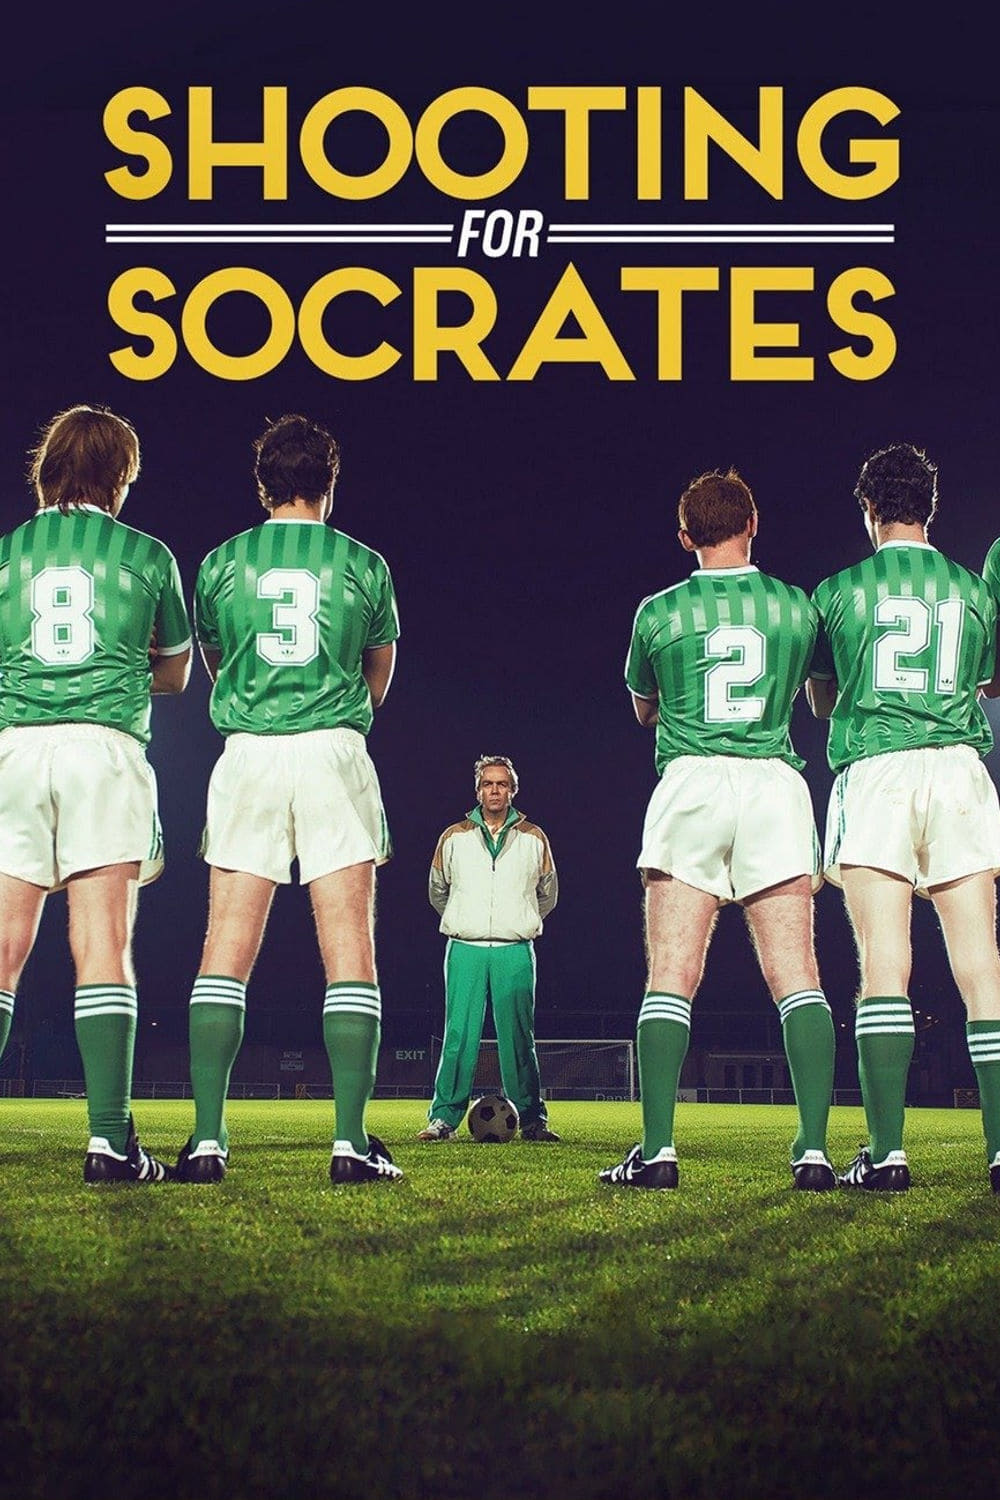 Shooting for Socrates (2014)